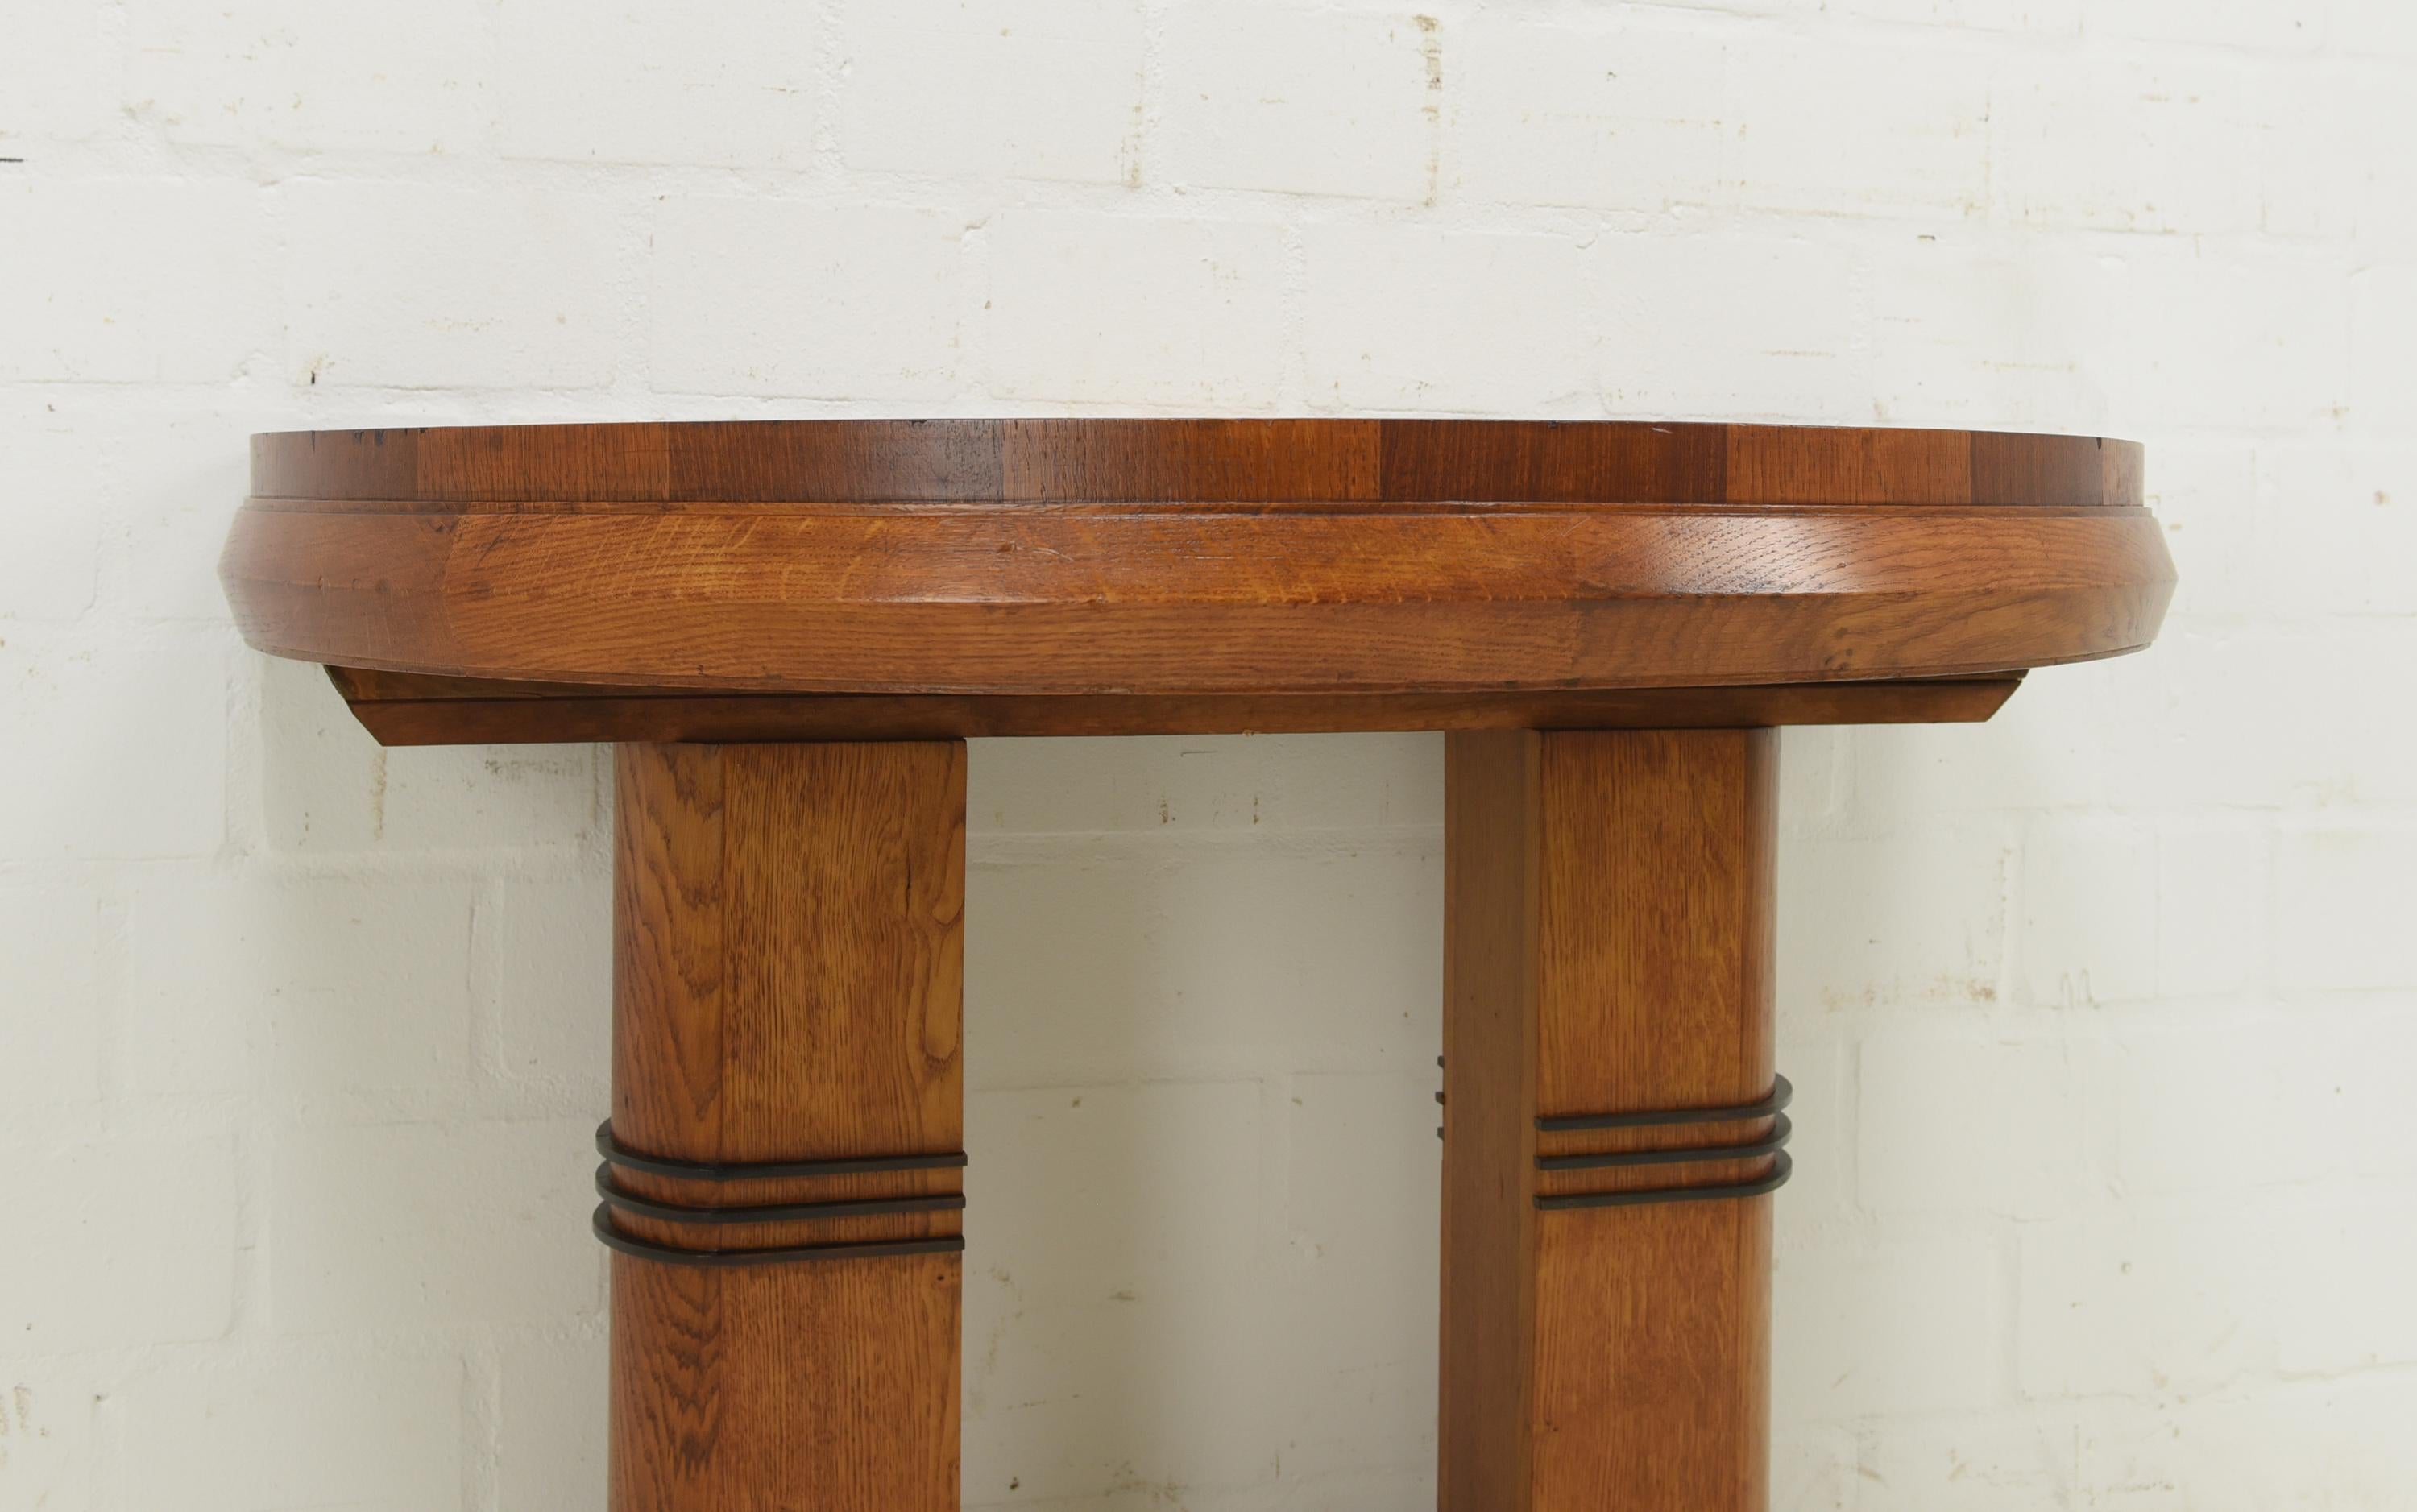 20th Century Art Deco Console Table / Wall Table in Oak Mahogany 1/2, 1930 For Sale